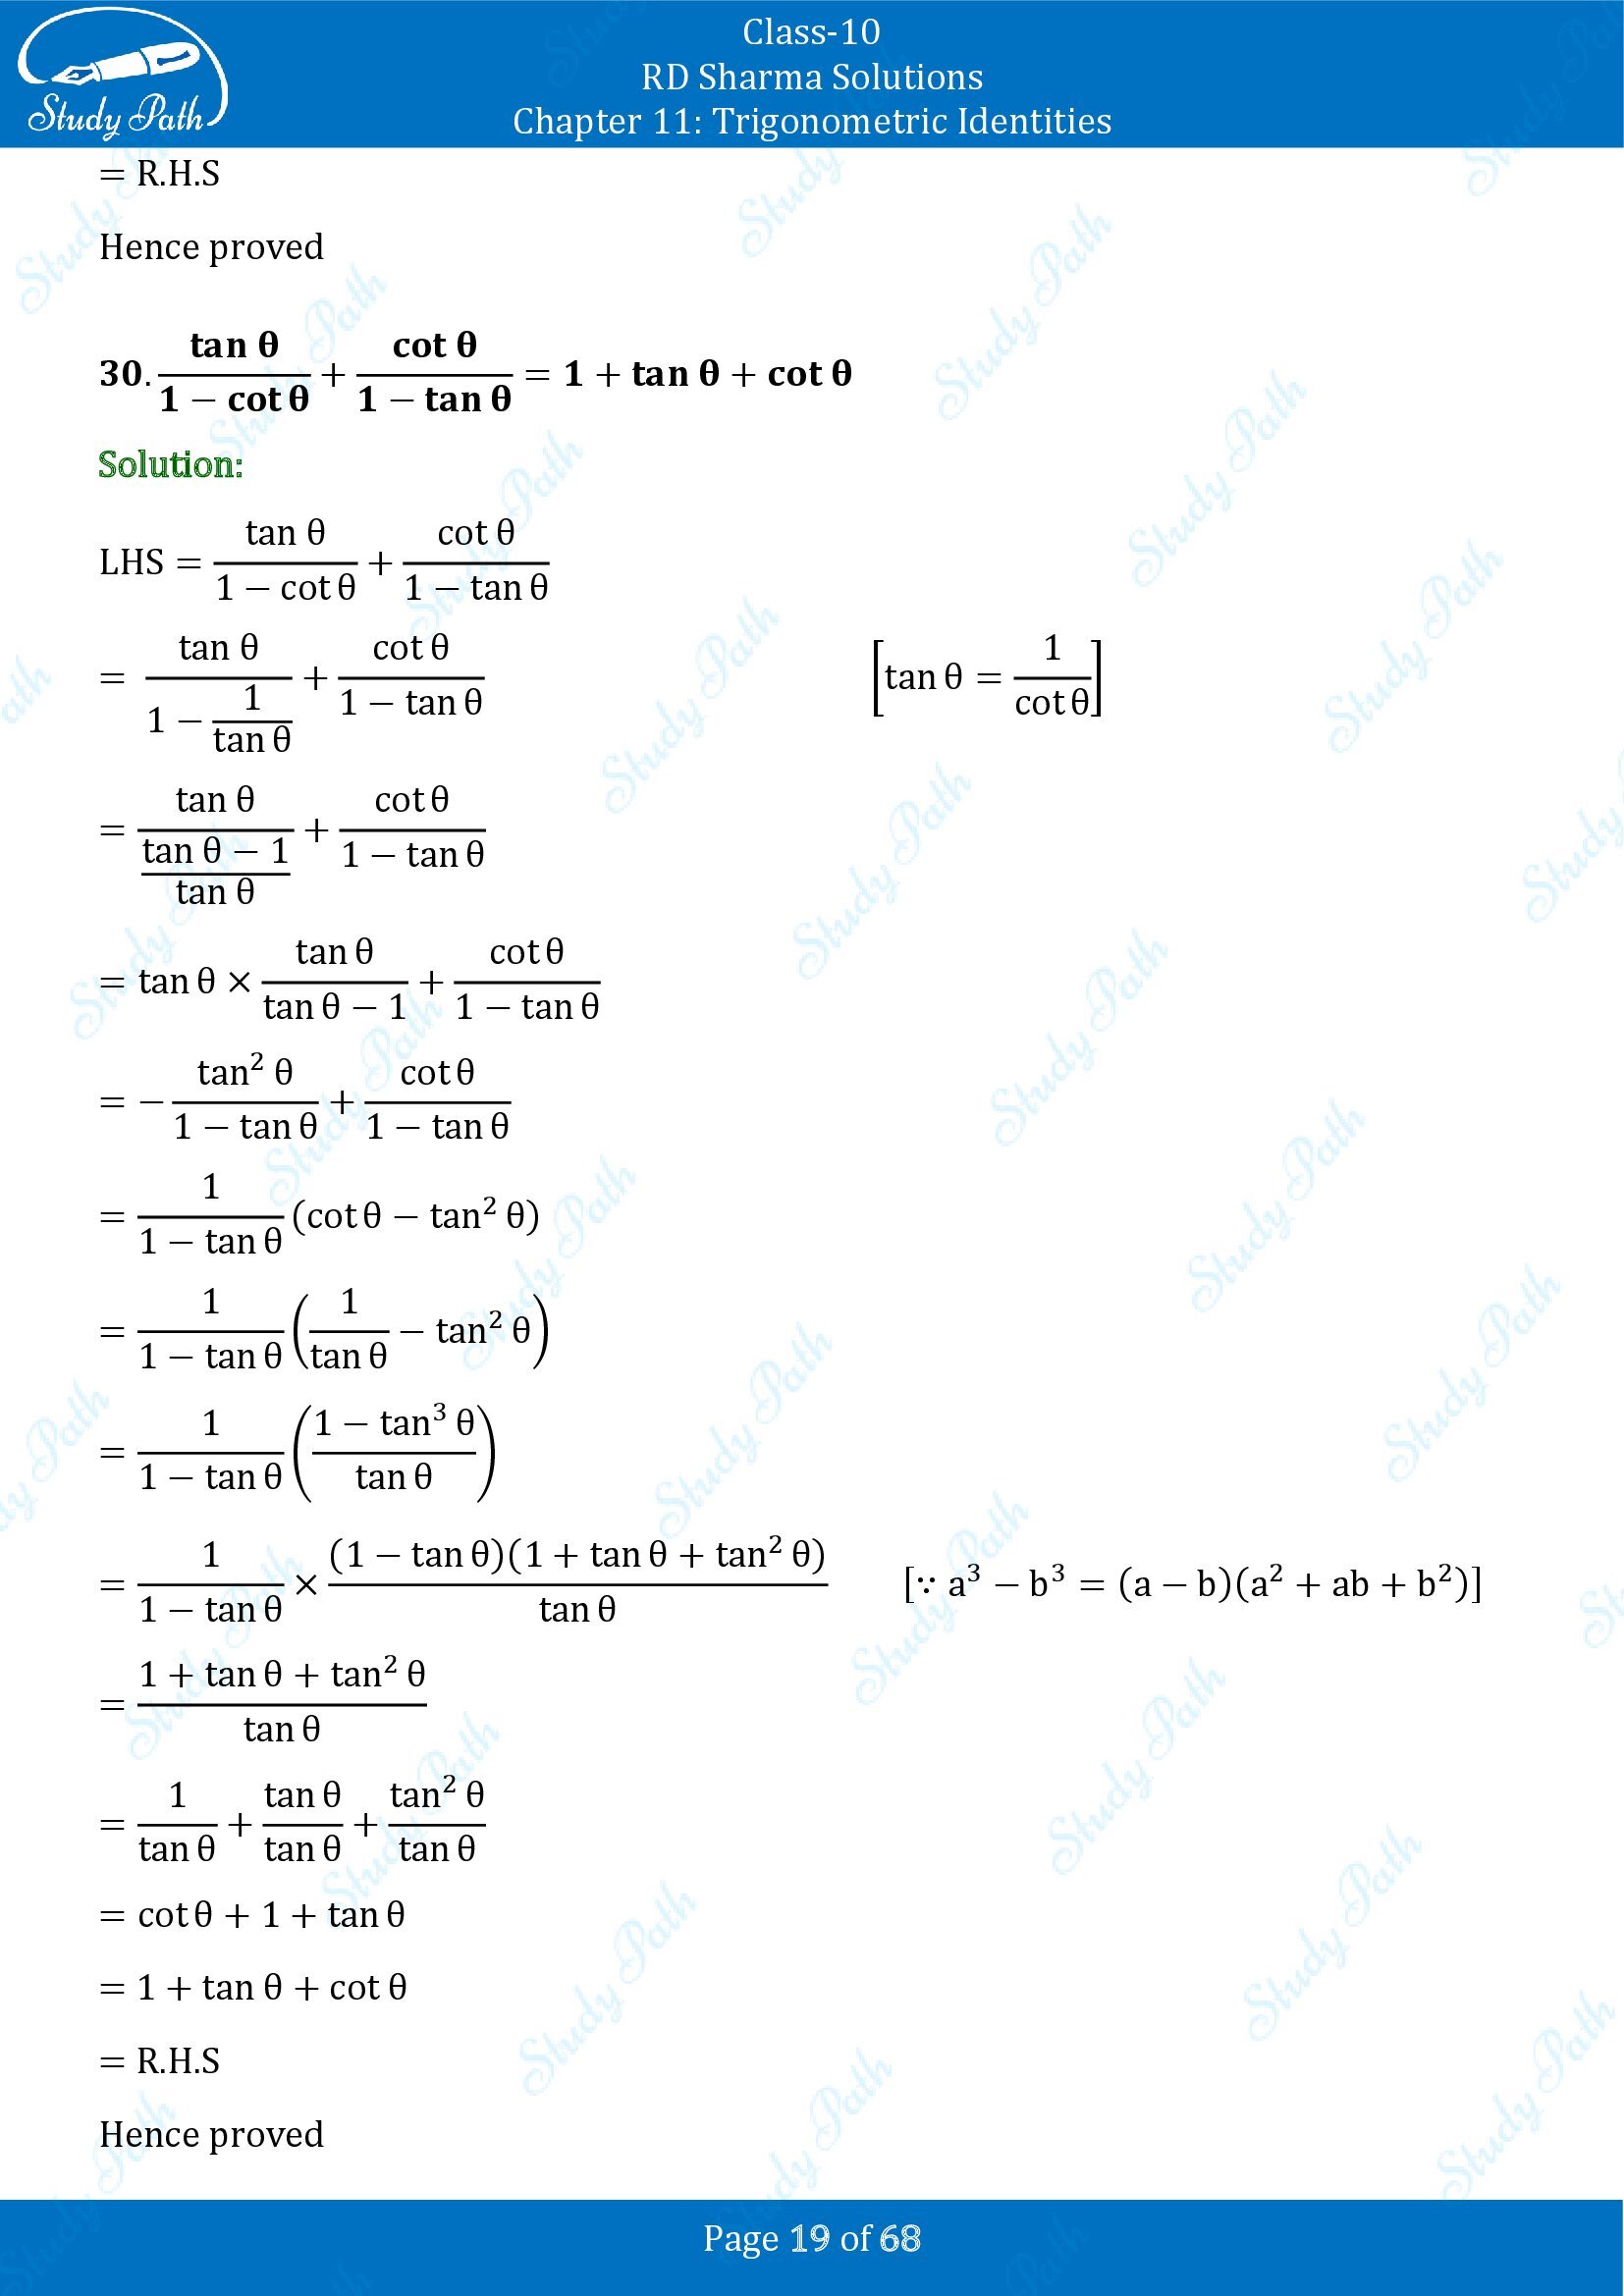 RD Sharma Solutions Class 10 Chapter 11 Trigonometric Identities Exercise 11.1 00019